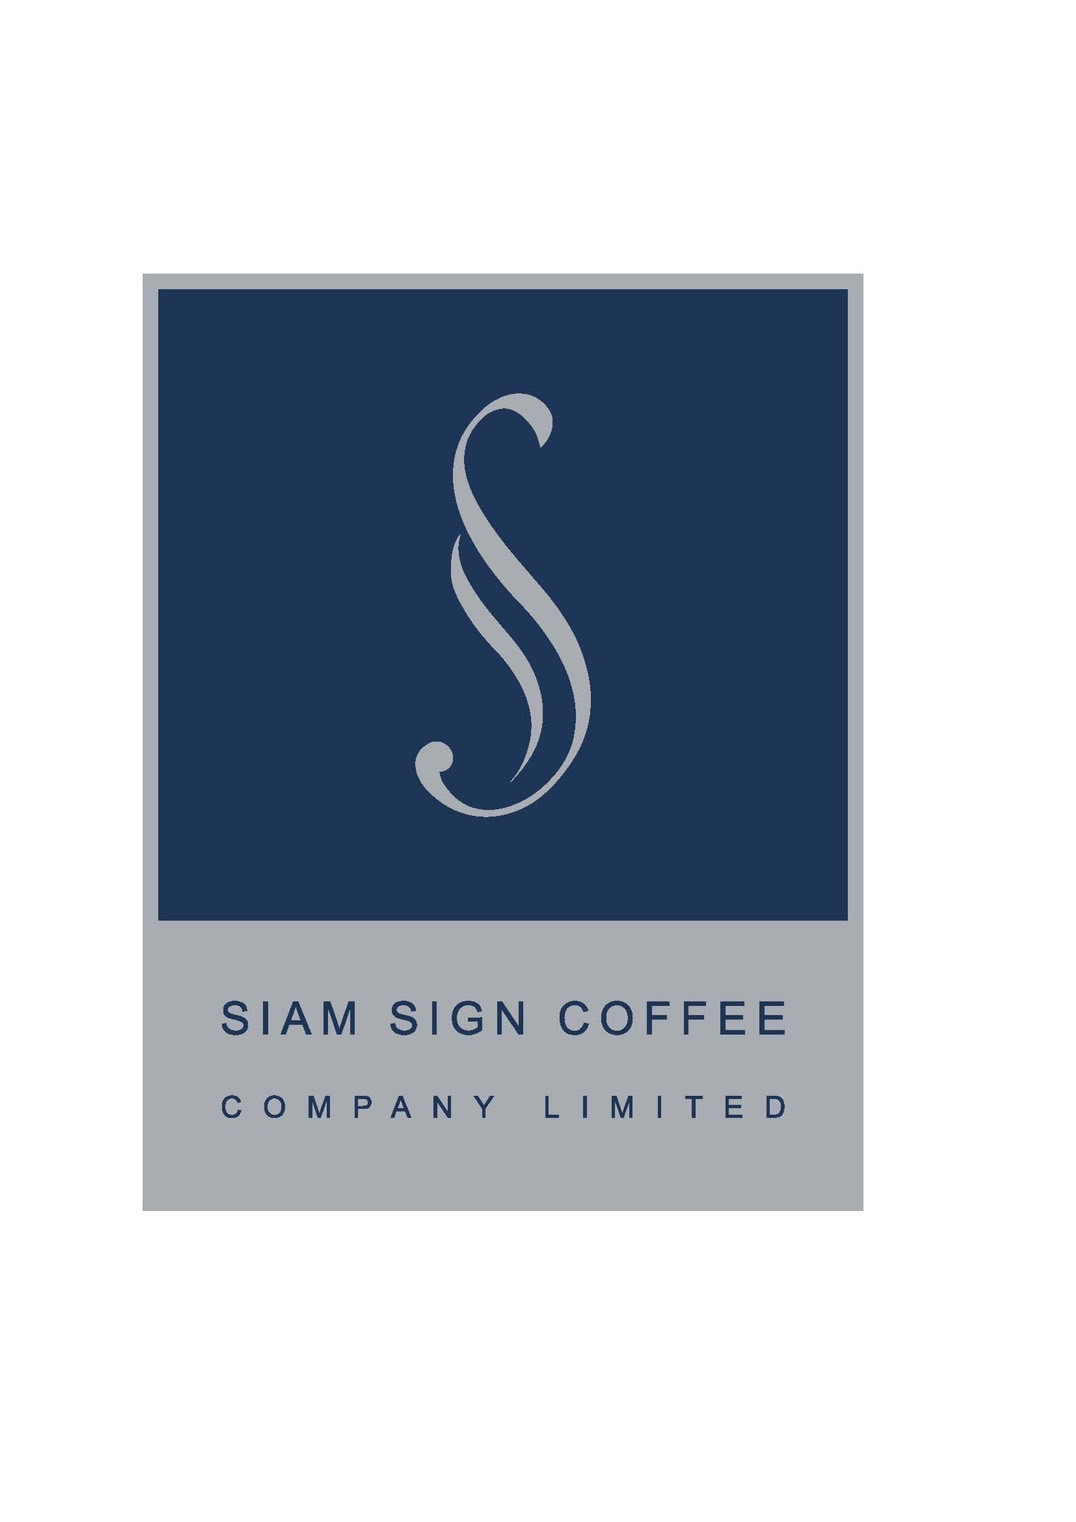 SIAM SIGN COFFEE COMPANY LIMITED